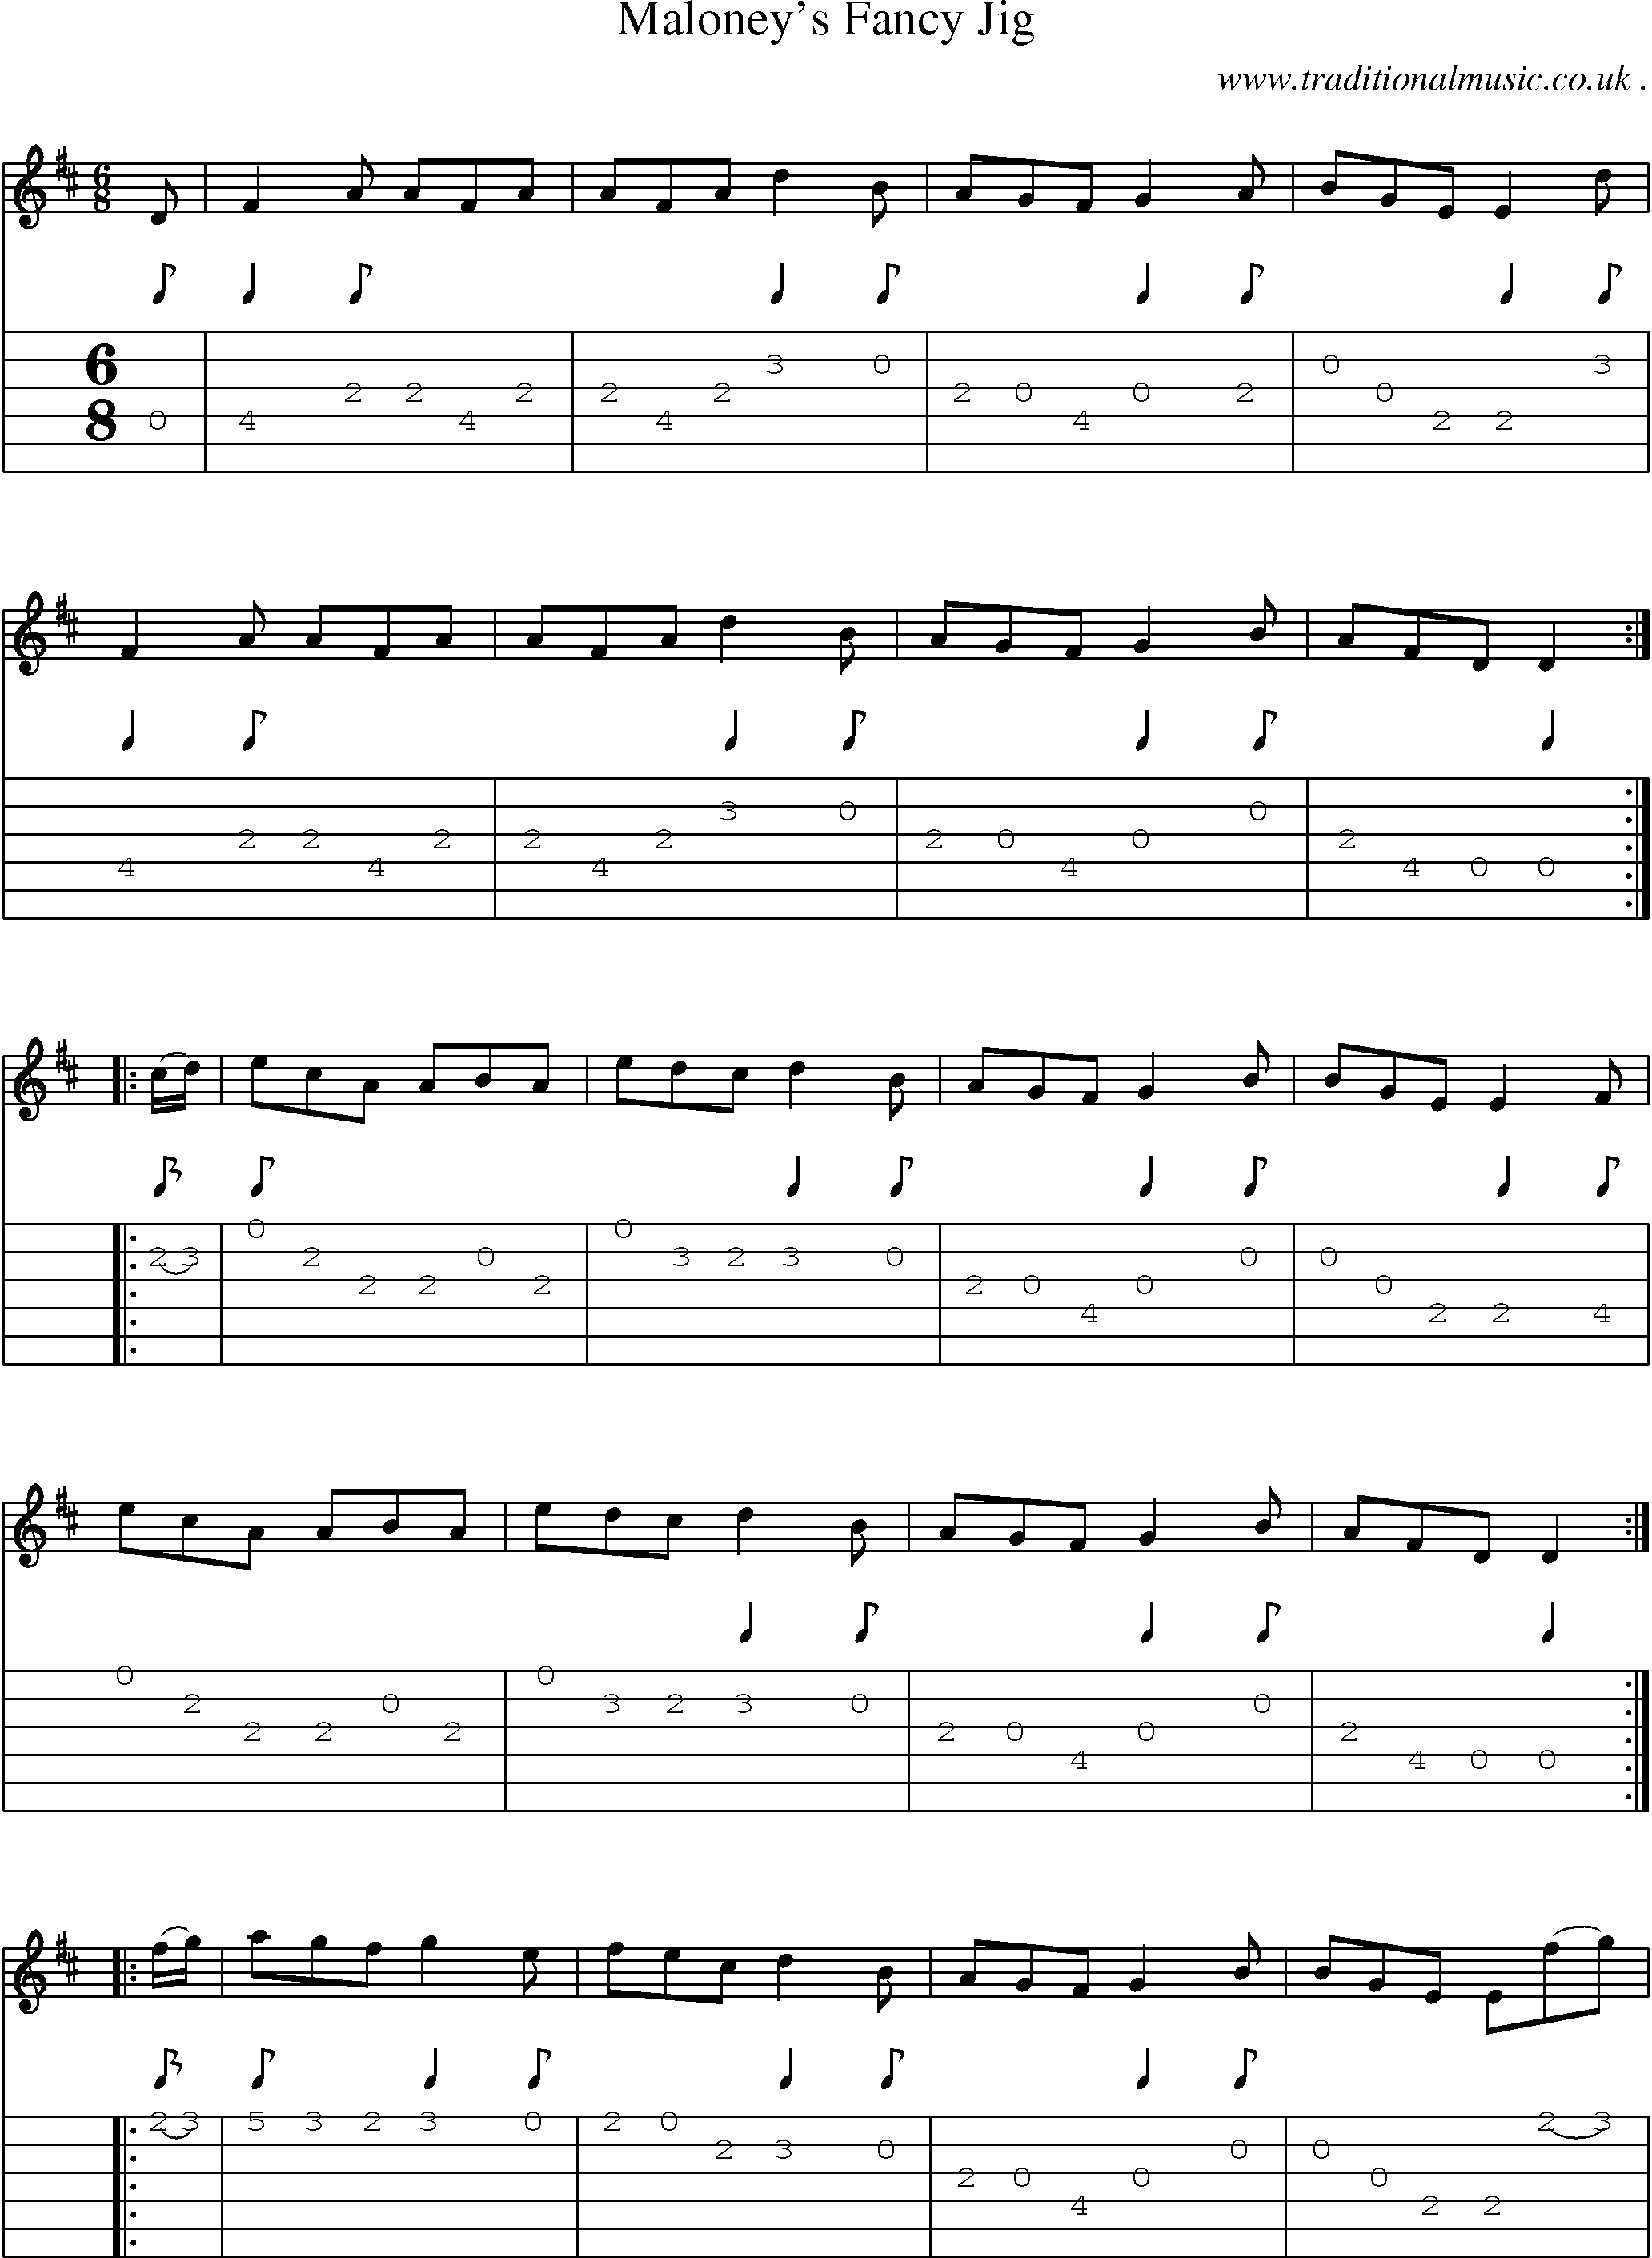 Sheet-Music and Guitar Tabs for Maloneys Fancy Jig